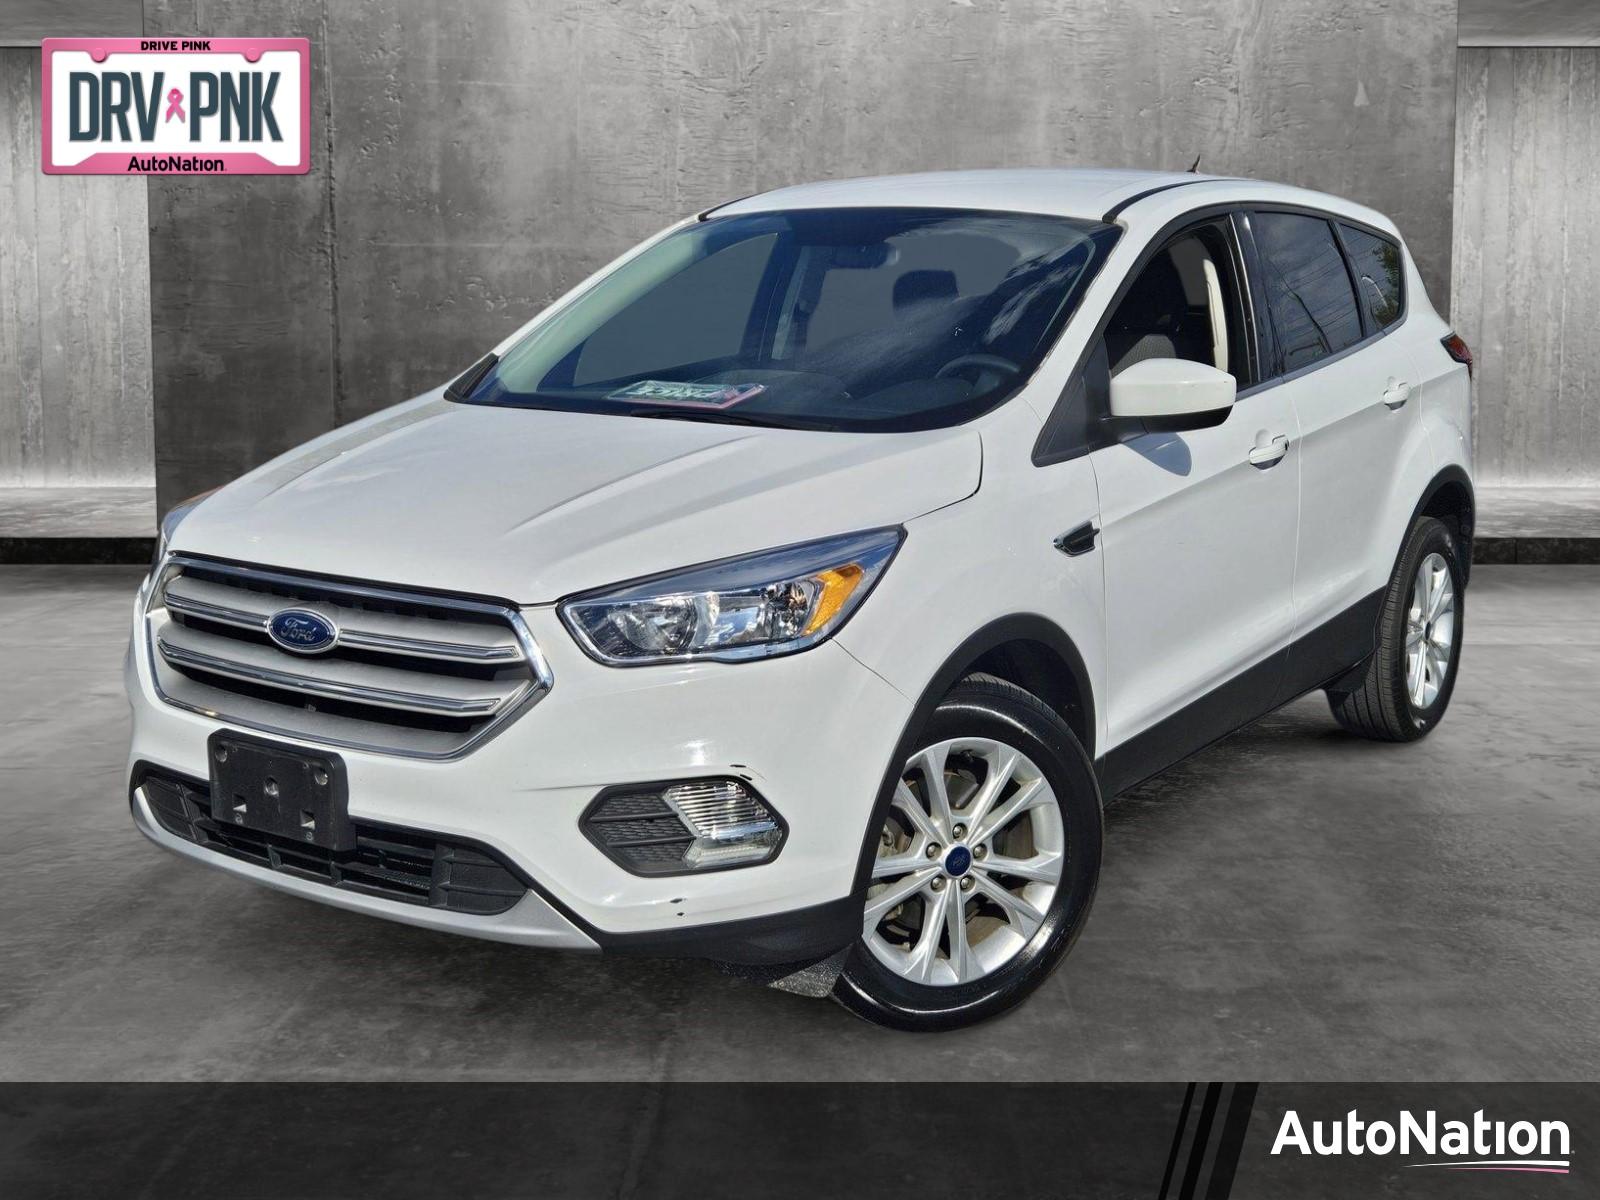 2019 Ford Escape Vehicle Photo in LAS VEGAS, NV 89146-3033